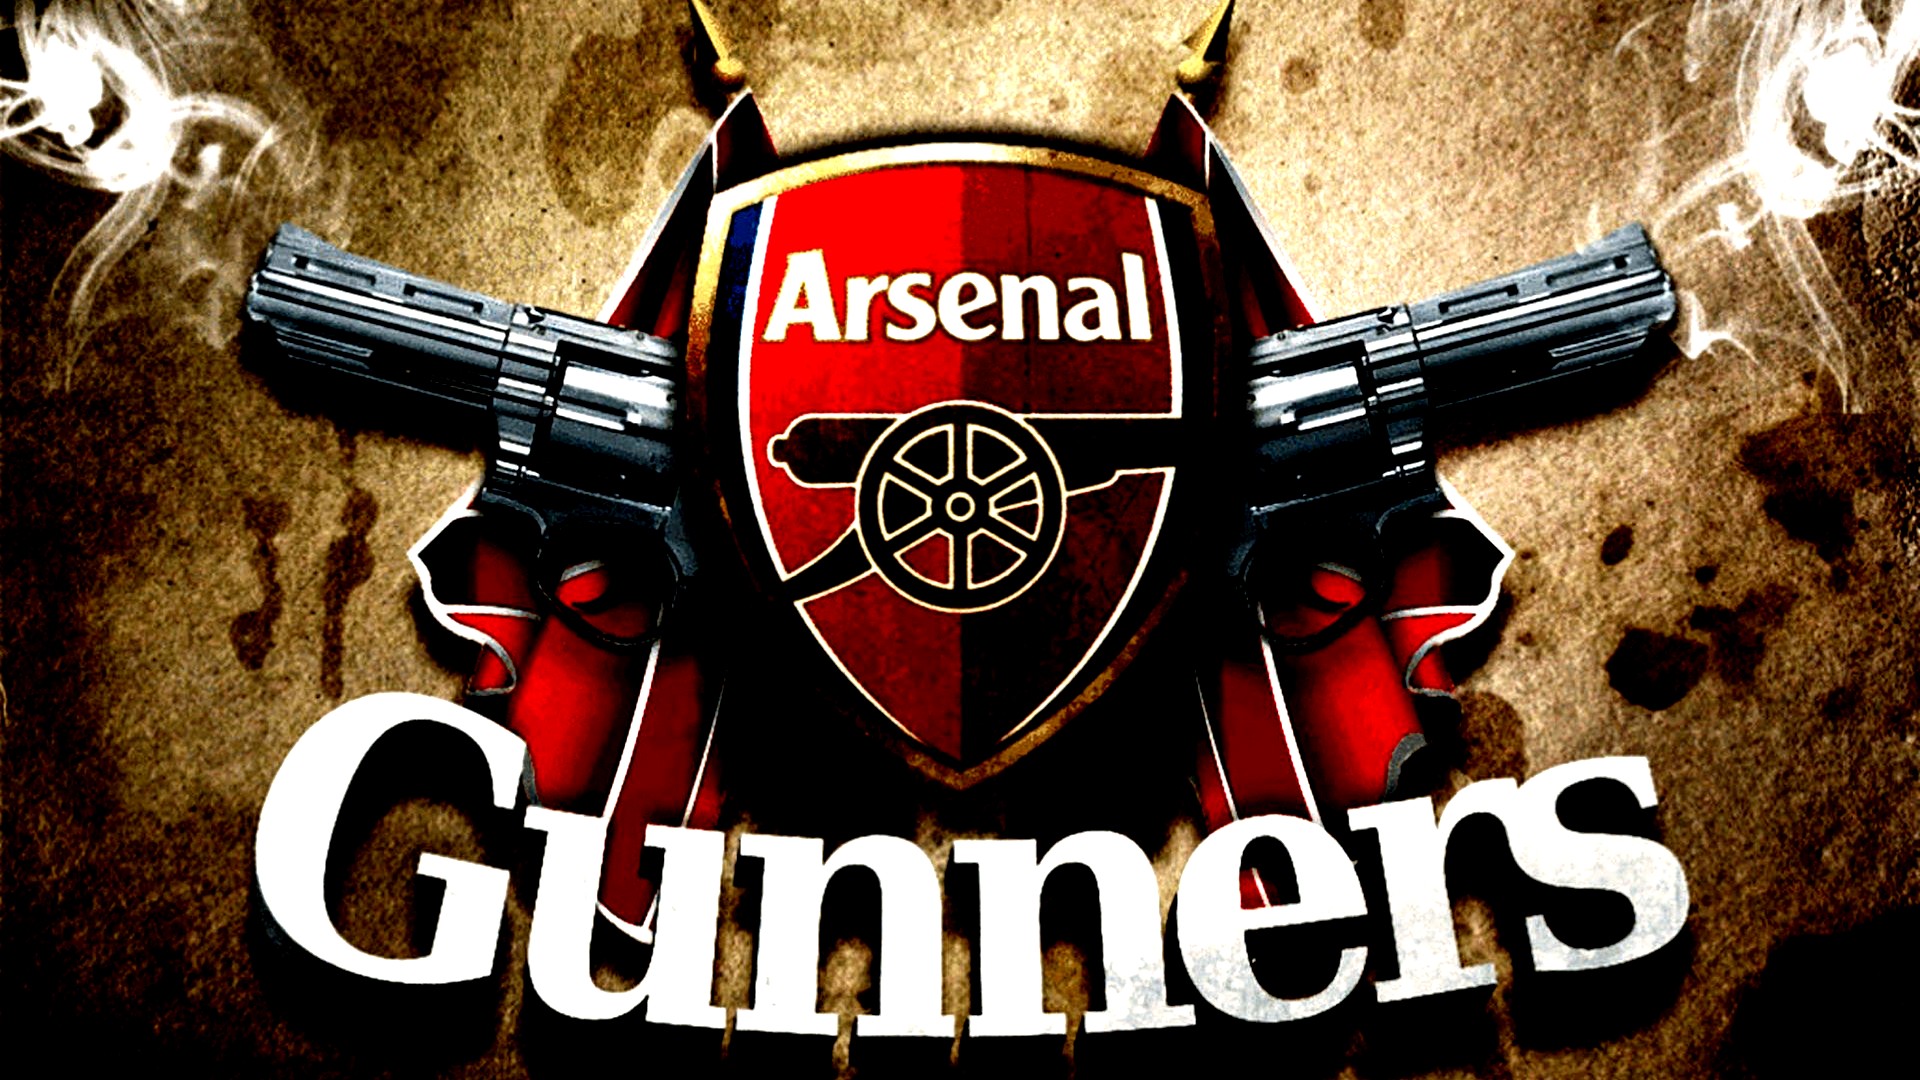 Arsenal Football Club Backgrounds HD With high-resolution 1920X1080 pixel. You can use this wallpaper for your Desktop Computers, Mac Screensavers, Windows Backgrounds, iPhone Wallpapers, Tablet or Android Lock screen and another Mobile device